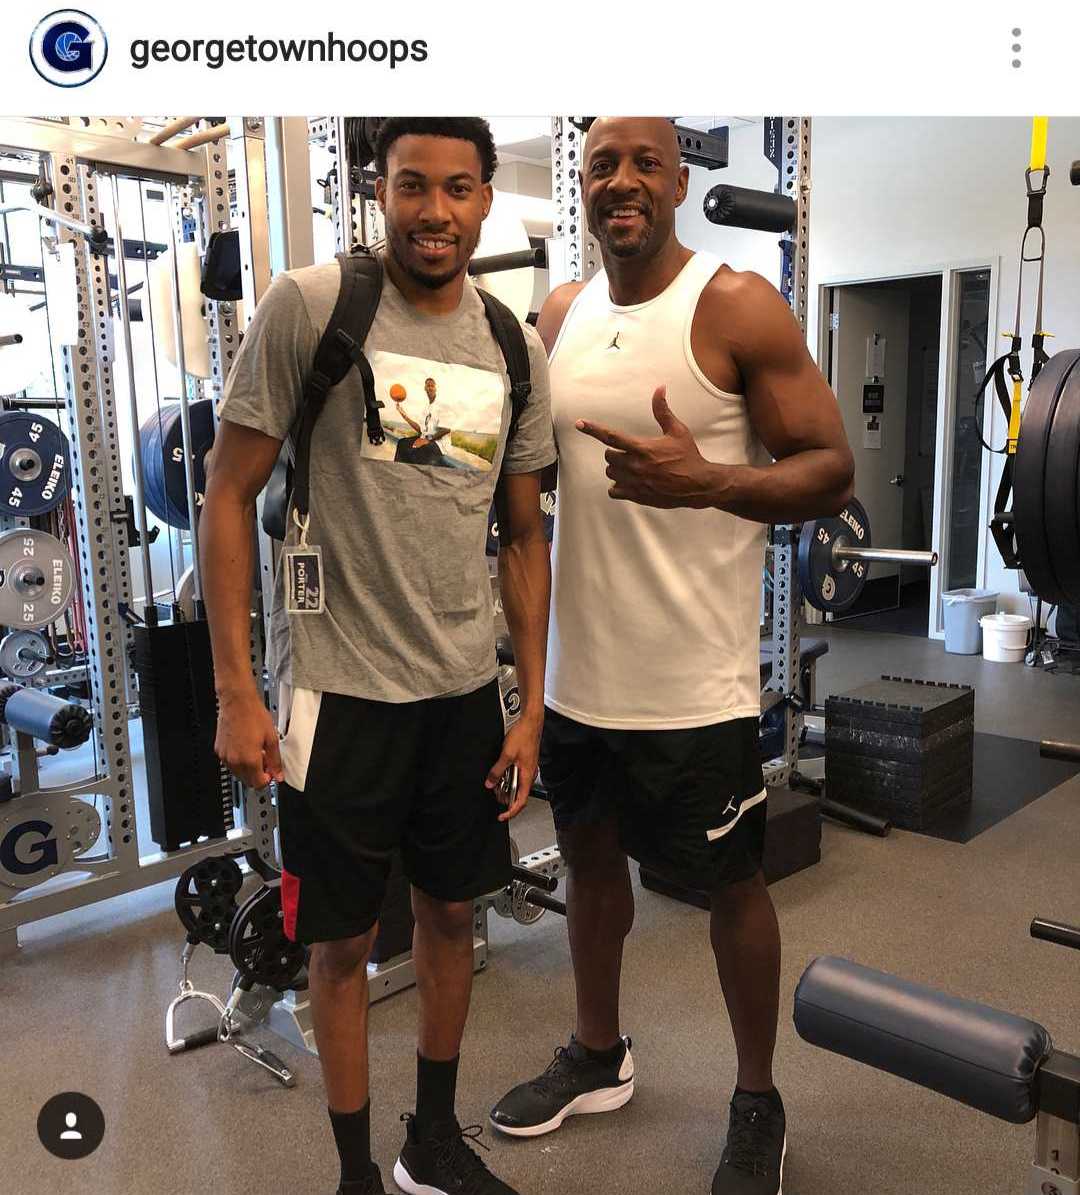 alonzo mourning muscles